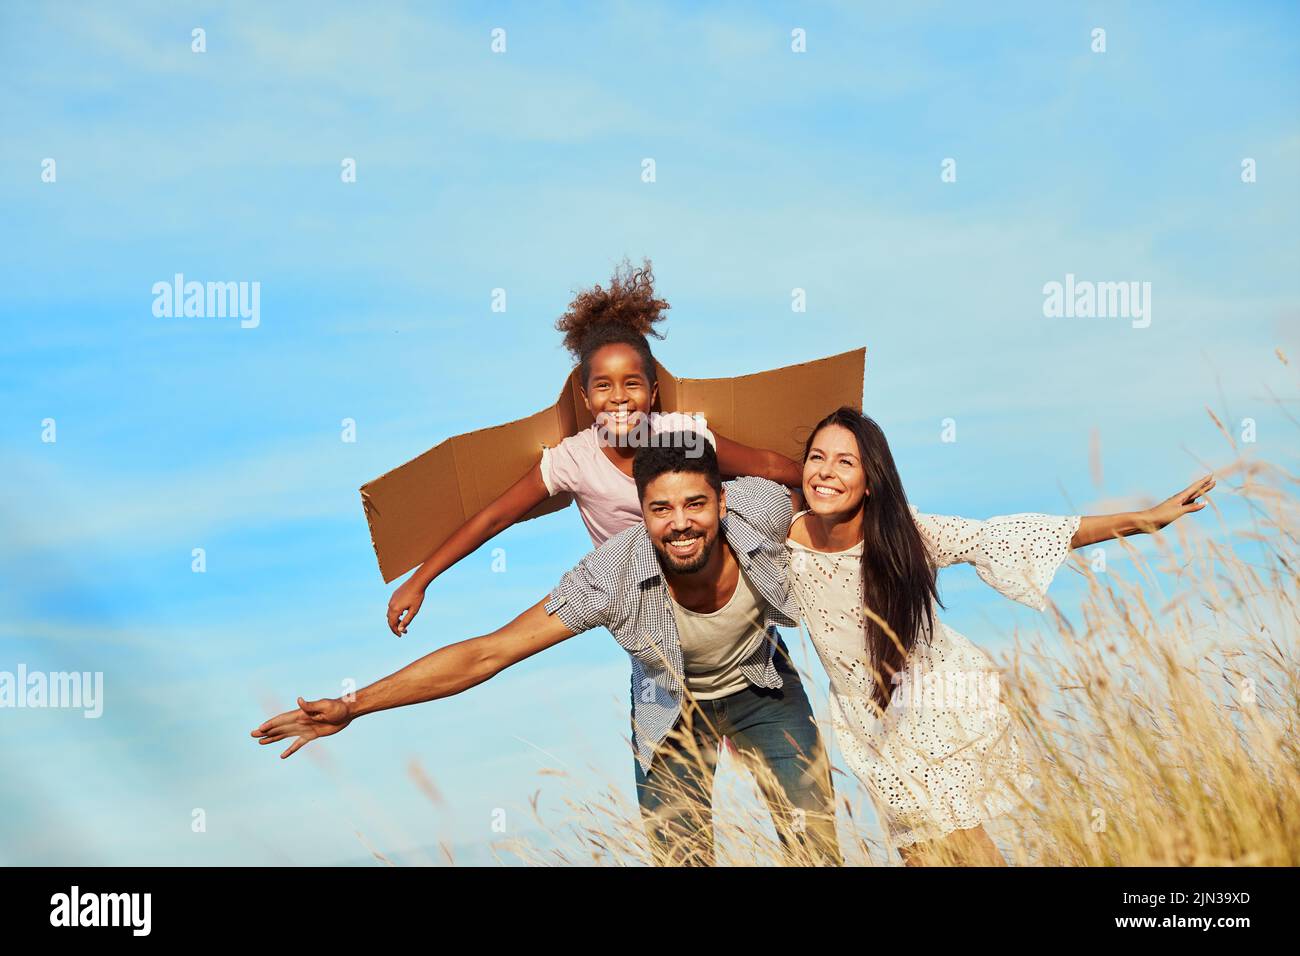 child daughter family happy mother father piggyback fun together girl cheerful field outdoor natur summer Stock Photo